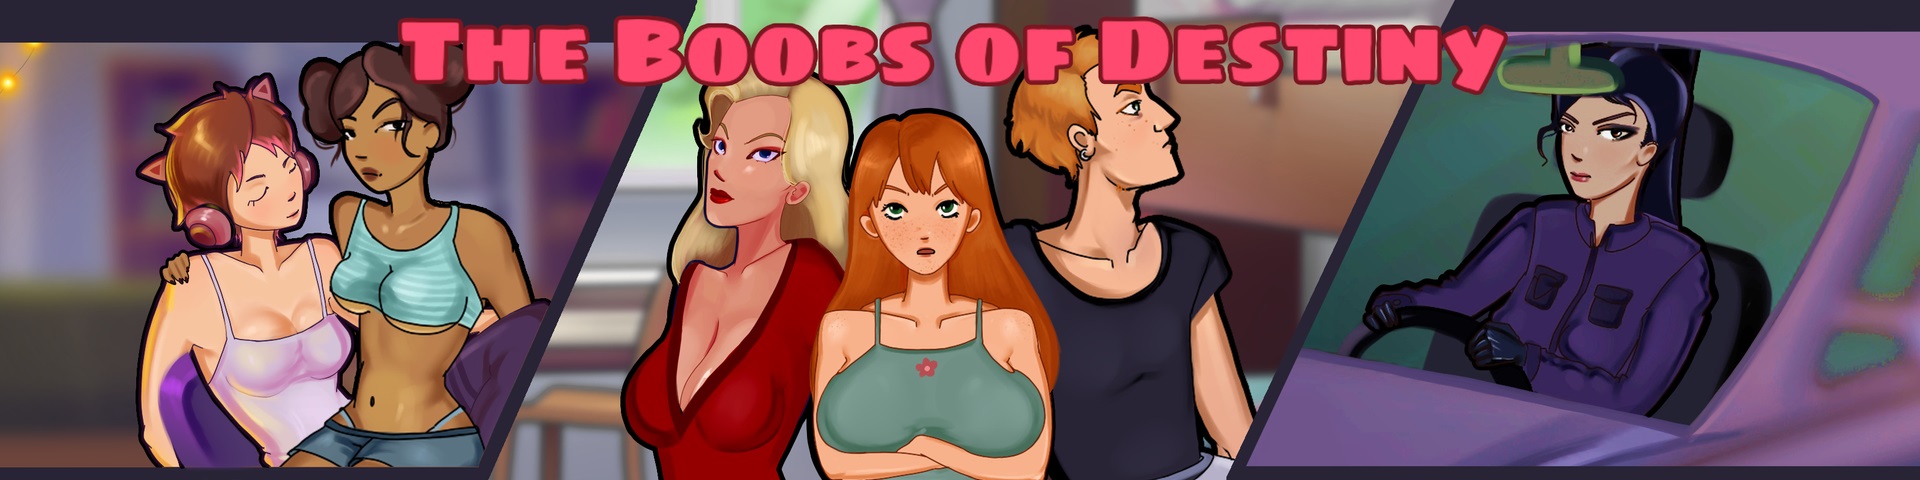 The Boobs of Destiny poster